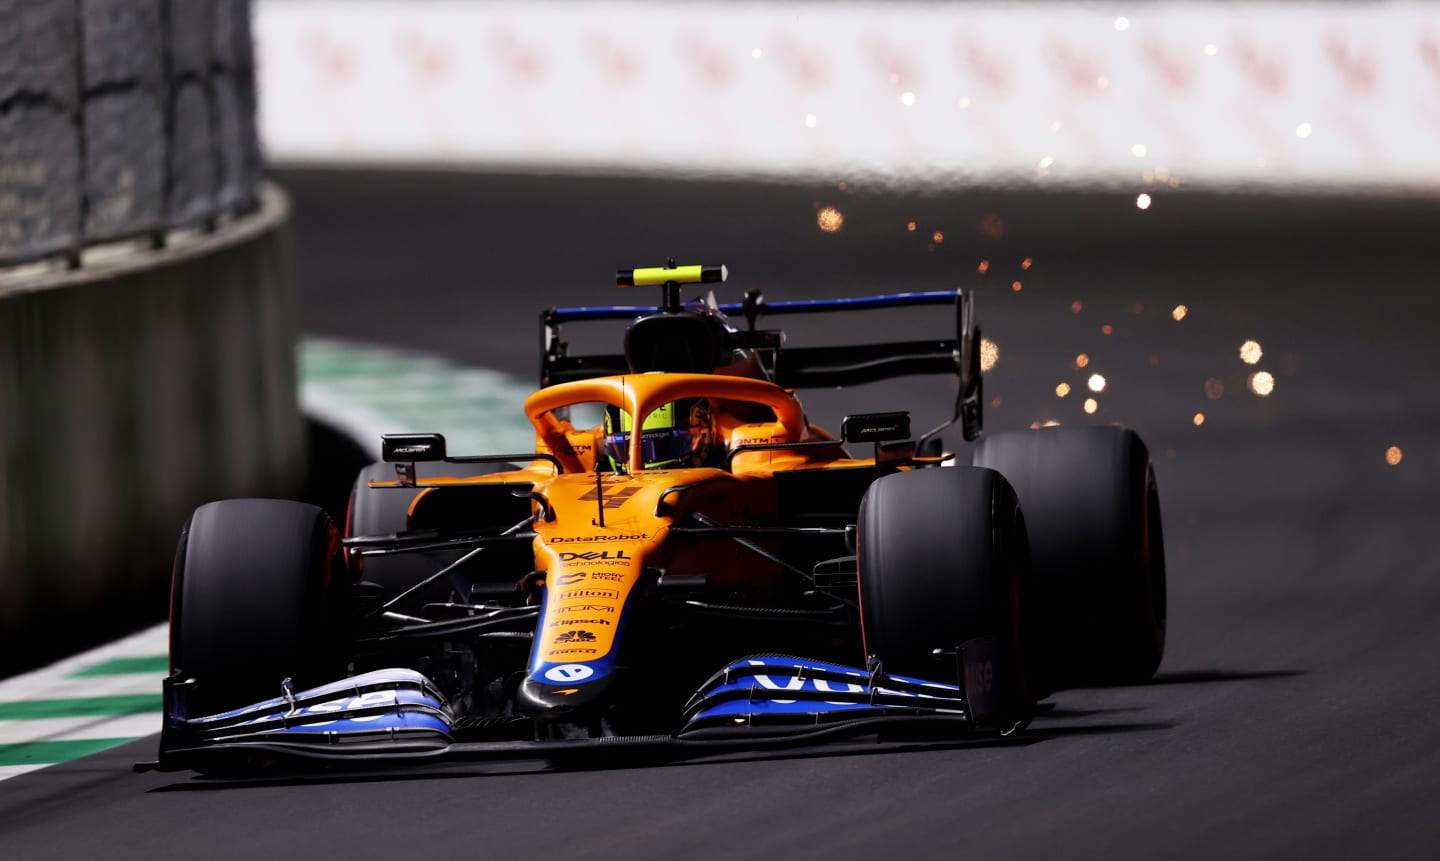 JEDDAH, SAUDI ARABIA - DECEMBER 03: Lando Norris of Great Britain driving the (4) McLaren F1 Team MCL35M Mercedes during practice ahead of the F1 Grand Prix of Saudi Arabia at Jeddah Corniche Circuit on December 03, 2021 in Jeddah, Saudi Arabia. (Photo by Lars Baron/Getty Images)